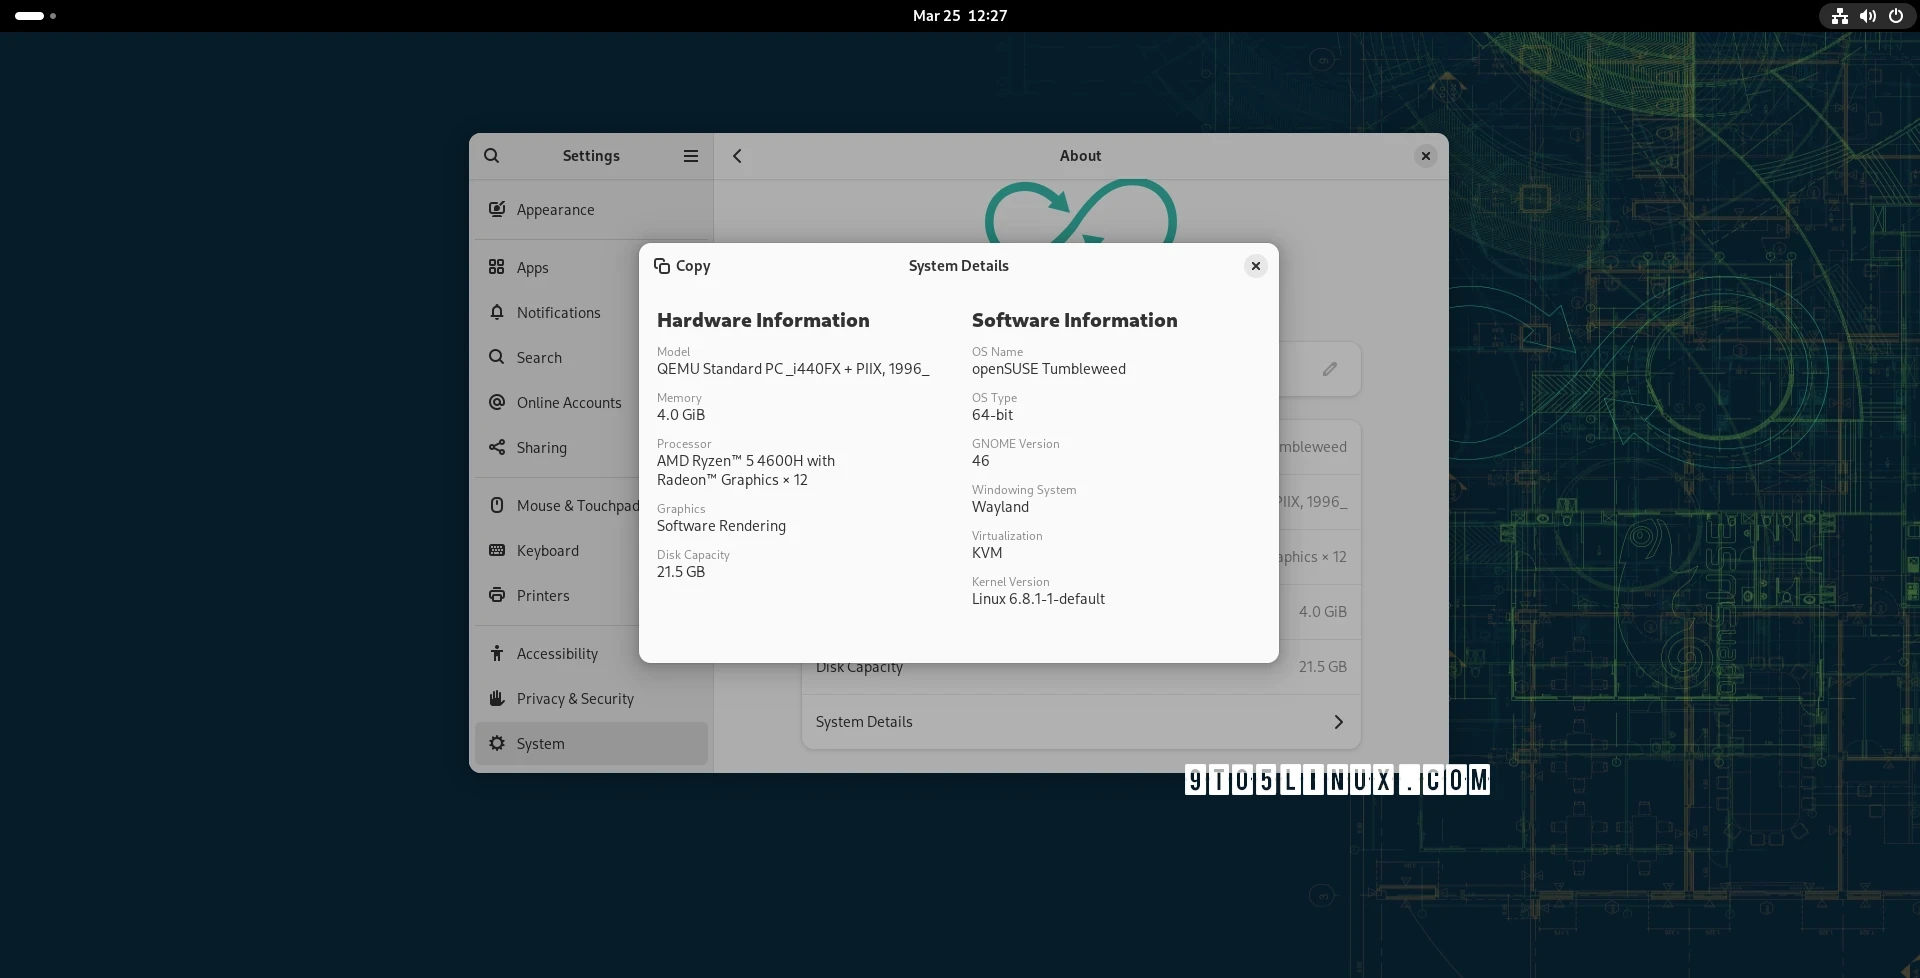 Screenshot of the GNOME 46 desktop environment on openSUSE Tumbleweed showing the System Details dialog in Settings.